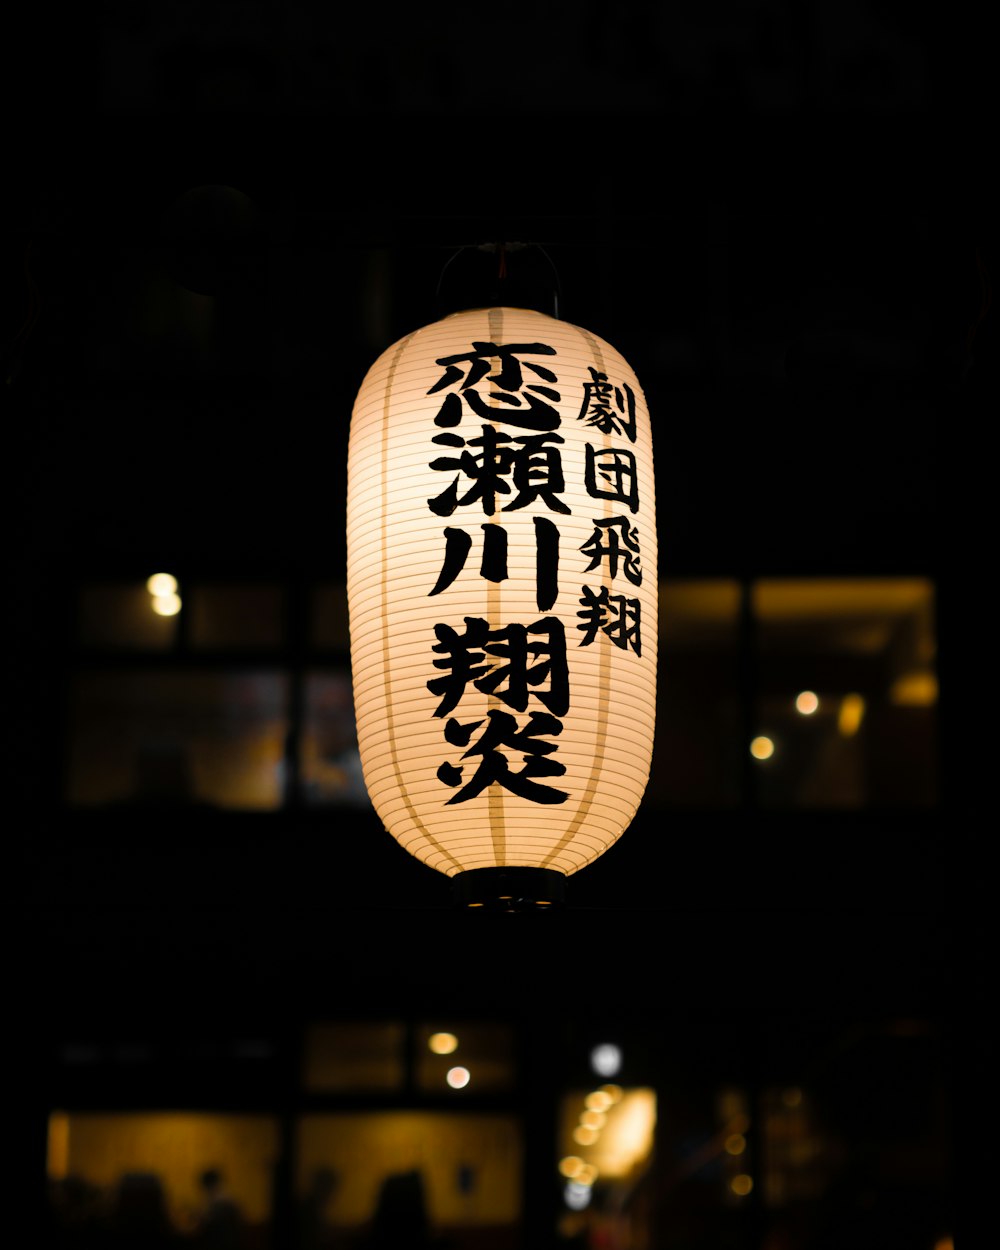 turned-on pendant lamp with non-English text